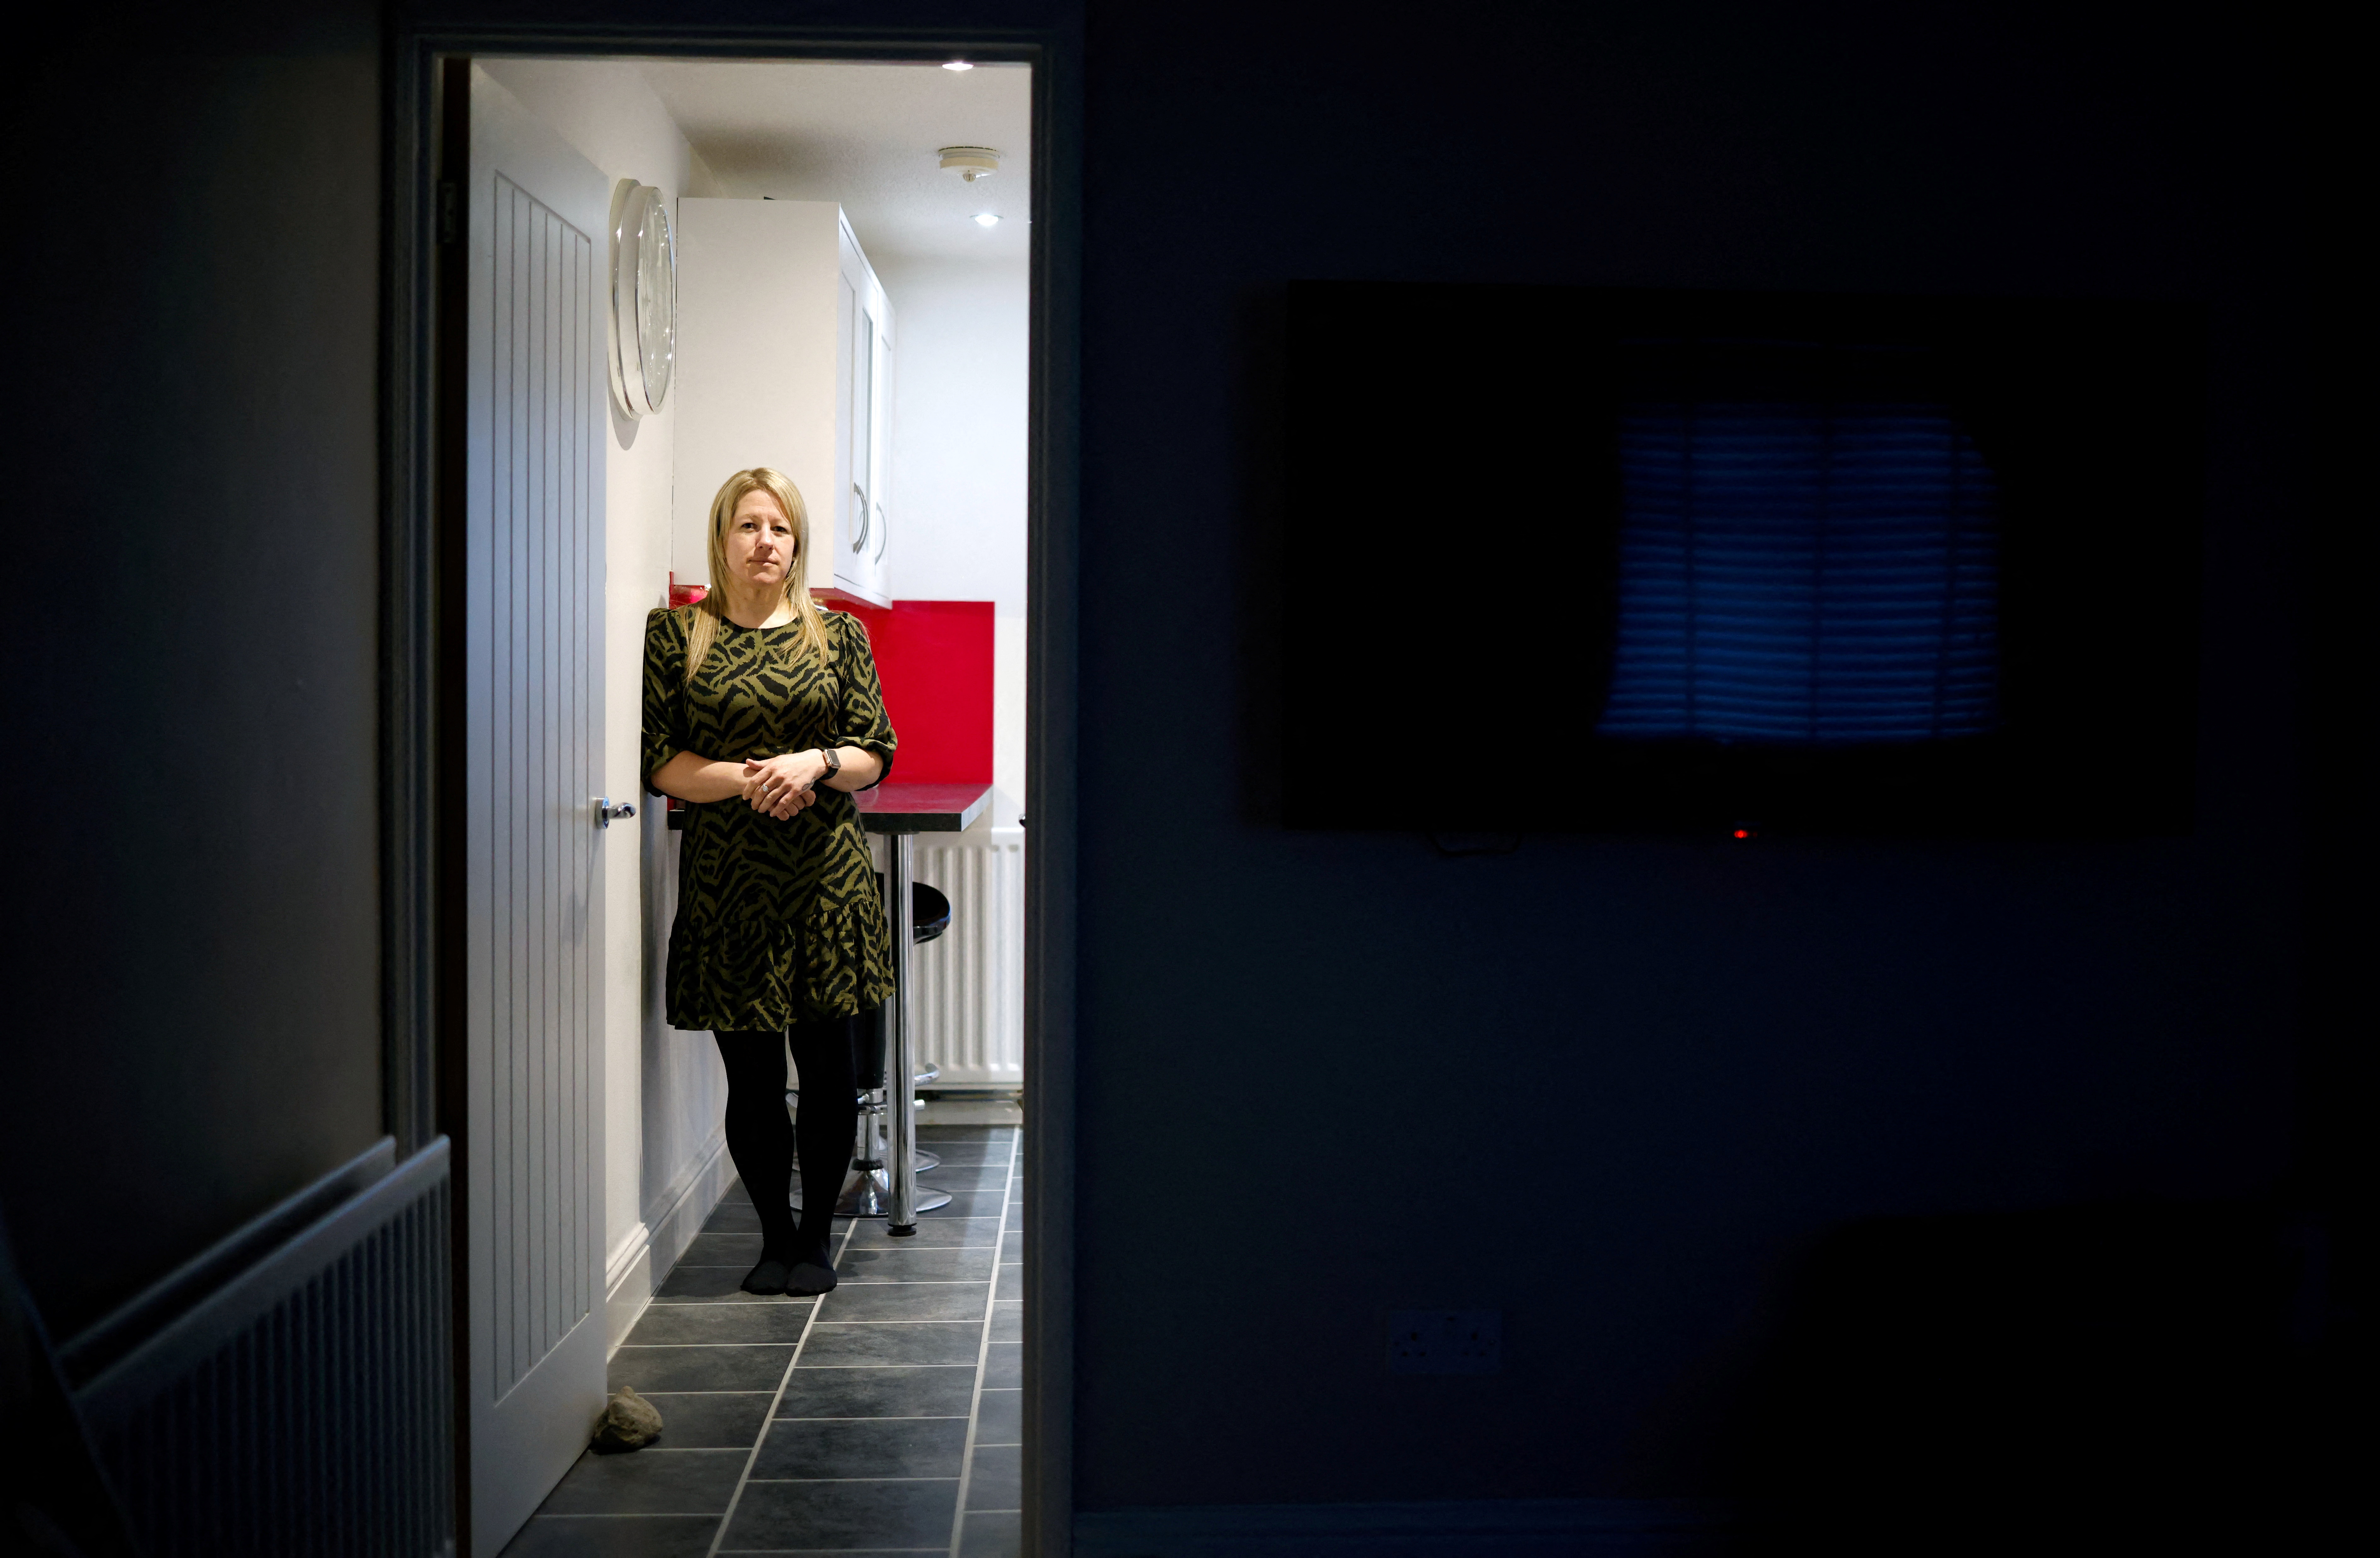 A cost of living crisis takes hold in homes across Britain